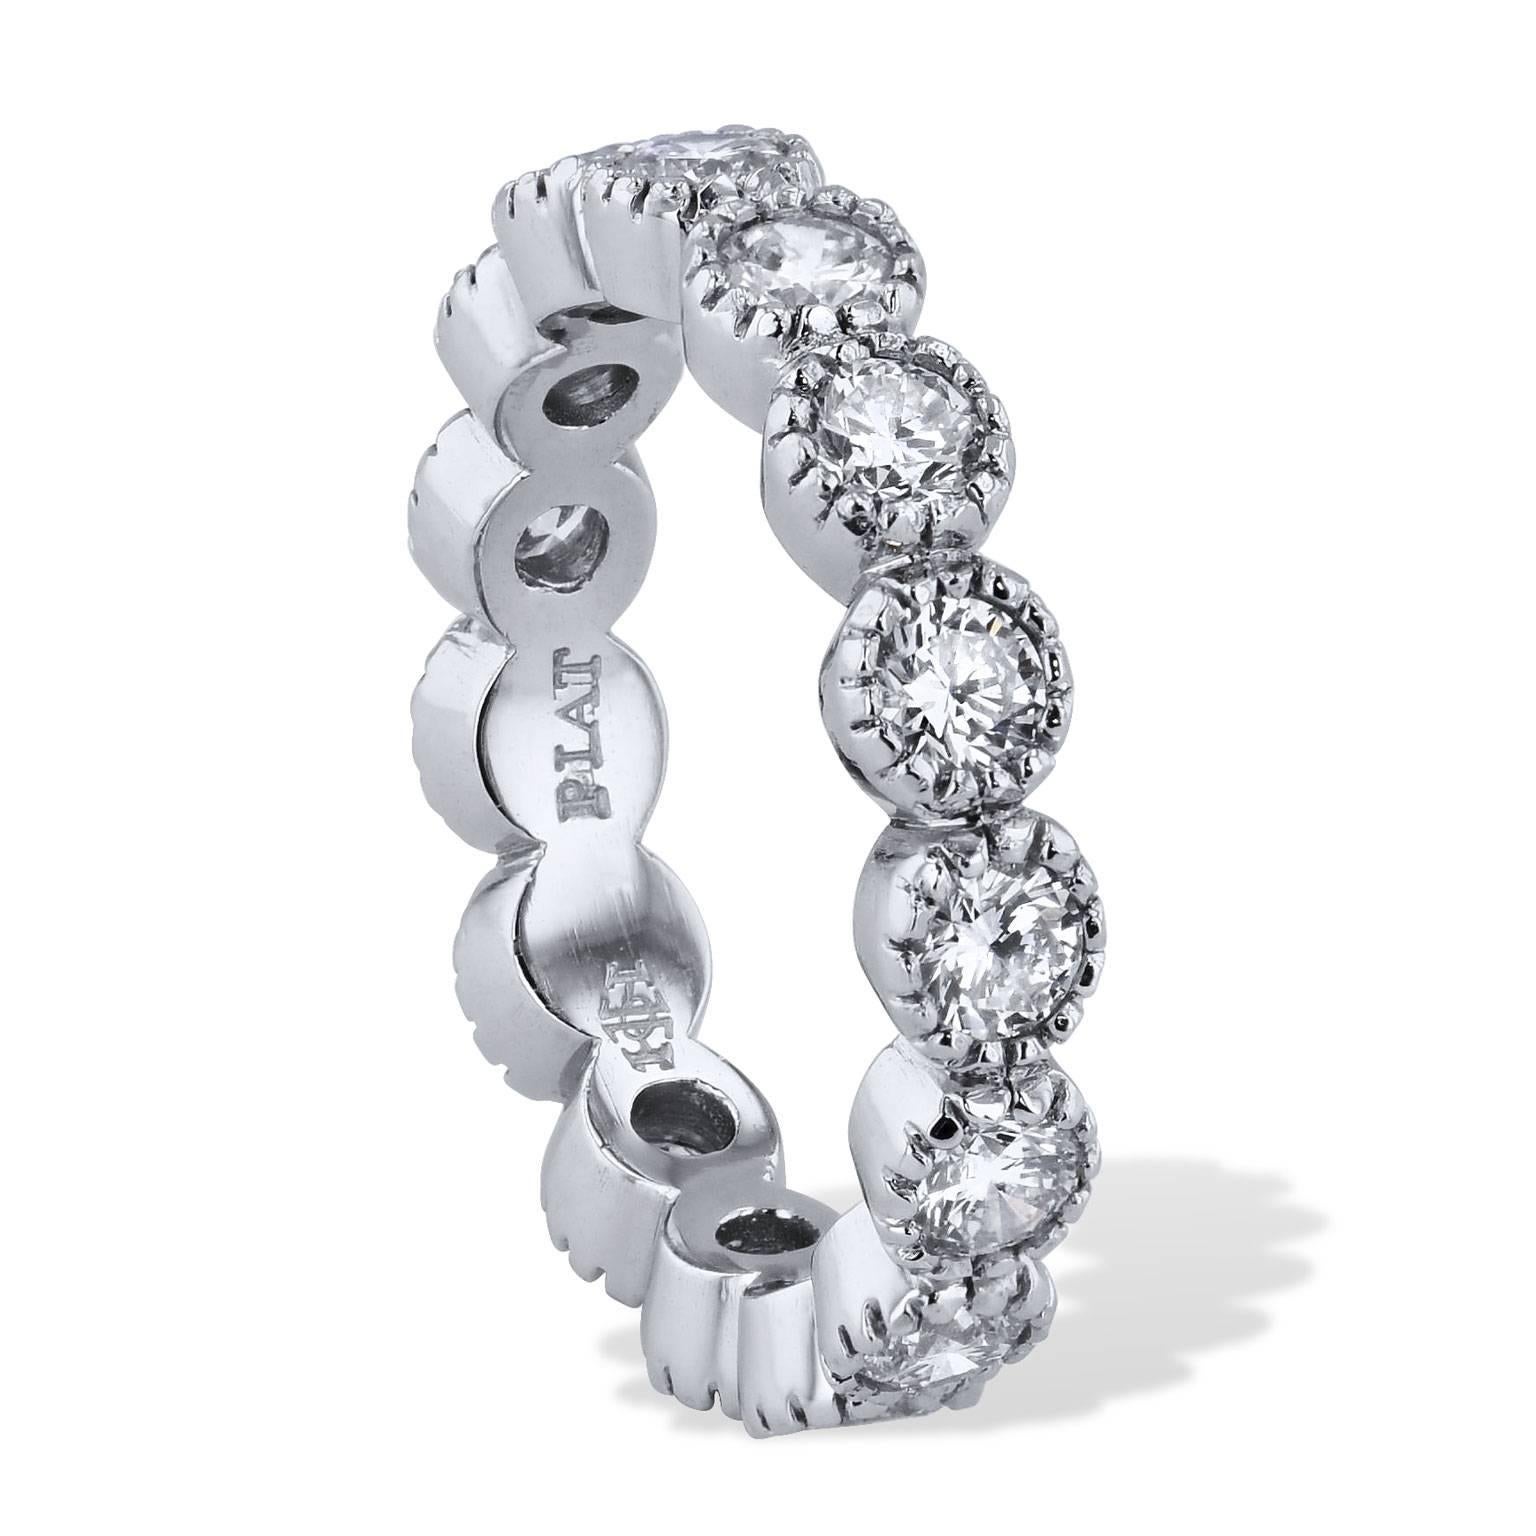 H & H 1.78 Carat Ten Prong Diamond Eternity Band Wedding Ring

This ring is a handmade, one of a kind design by H&H Jewels. 
It features 1.78 carats of round diamonds that are ten-prong set in a platinum band ring (F/G/VS). 

Size 6.25